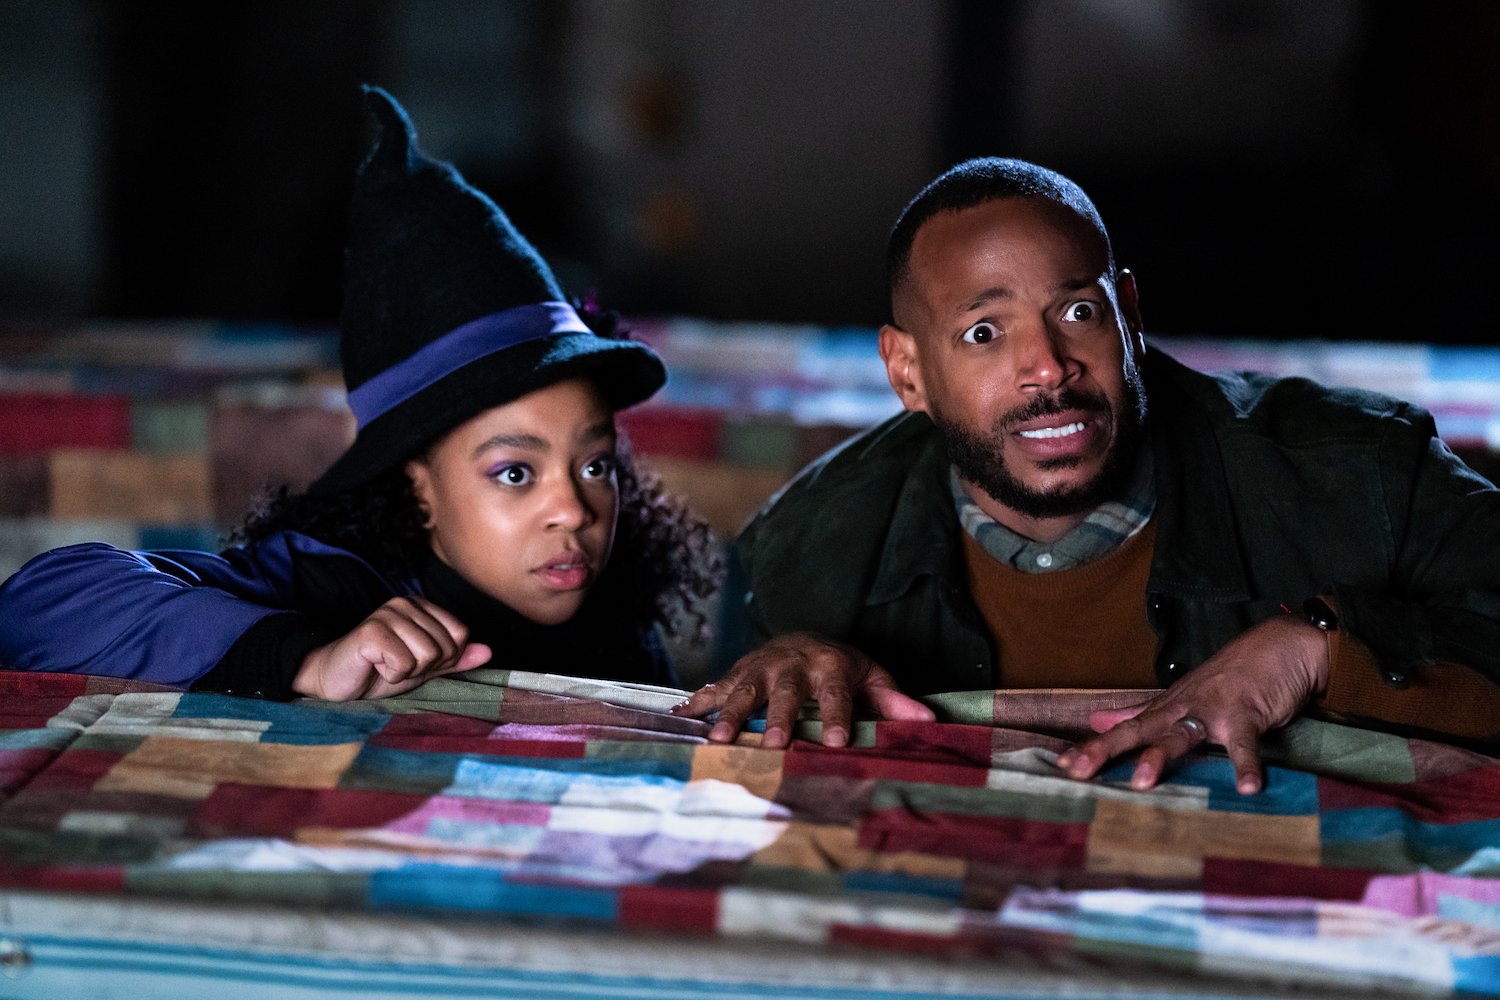 One of the horror movies premiering on Netflix in October stars Marlon Wayans and Priah Ferguson, seen here in a production still from the film.